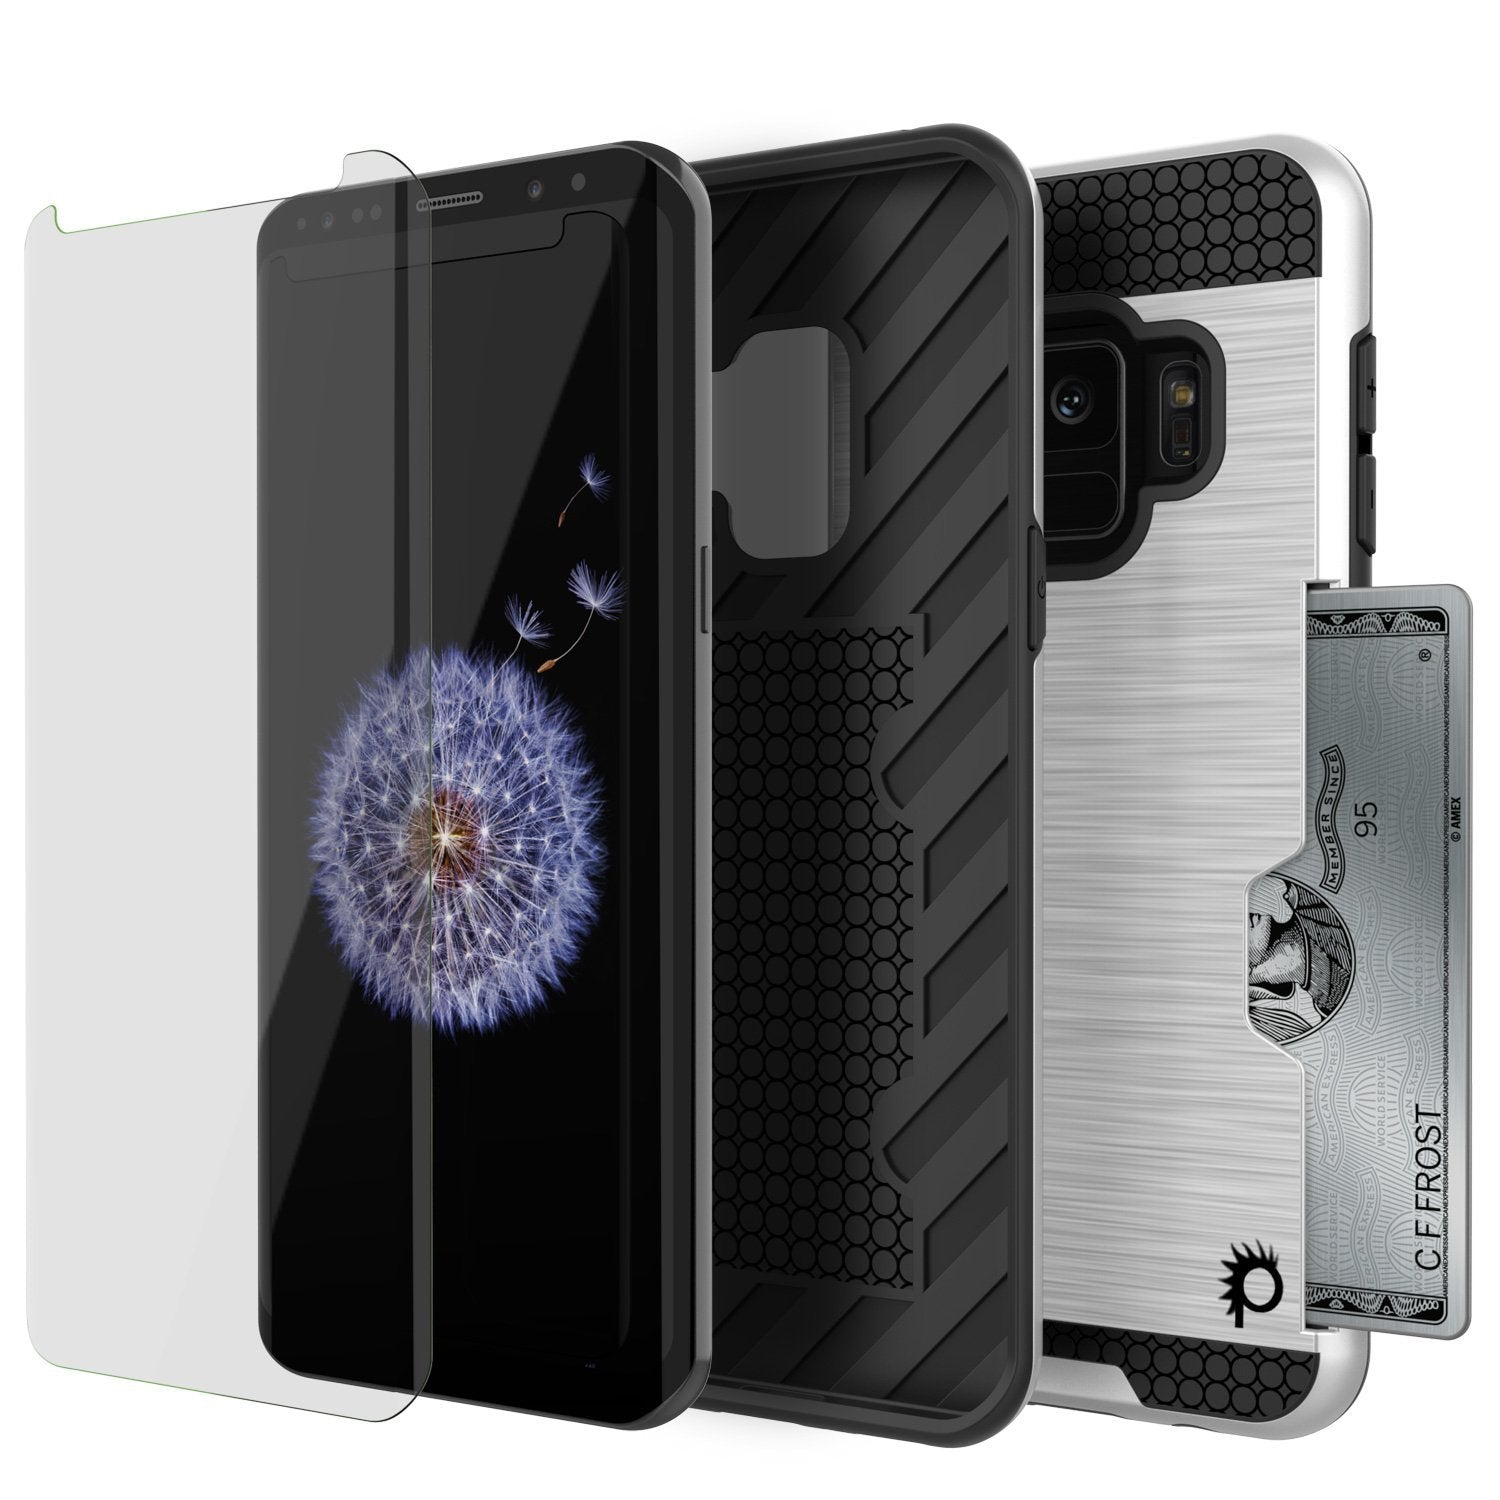 Galaxy S9 Case, PUNKcase [SLOT Series] [Slim Fit] Dual-Layer Armor Cover w/Integrated Anti-Shock System, Credit Card Slot & Screen Protector [White]